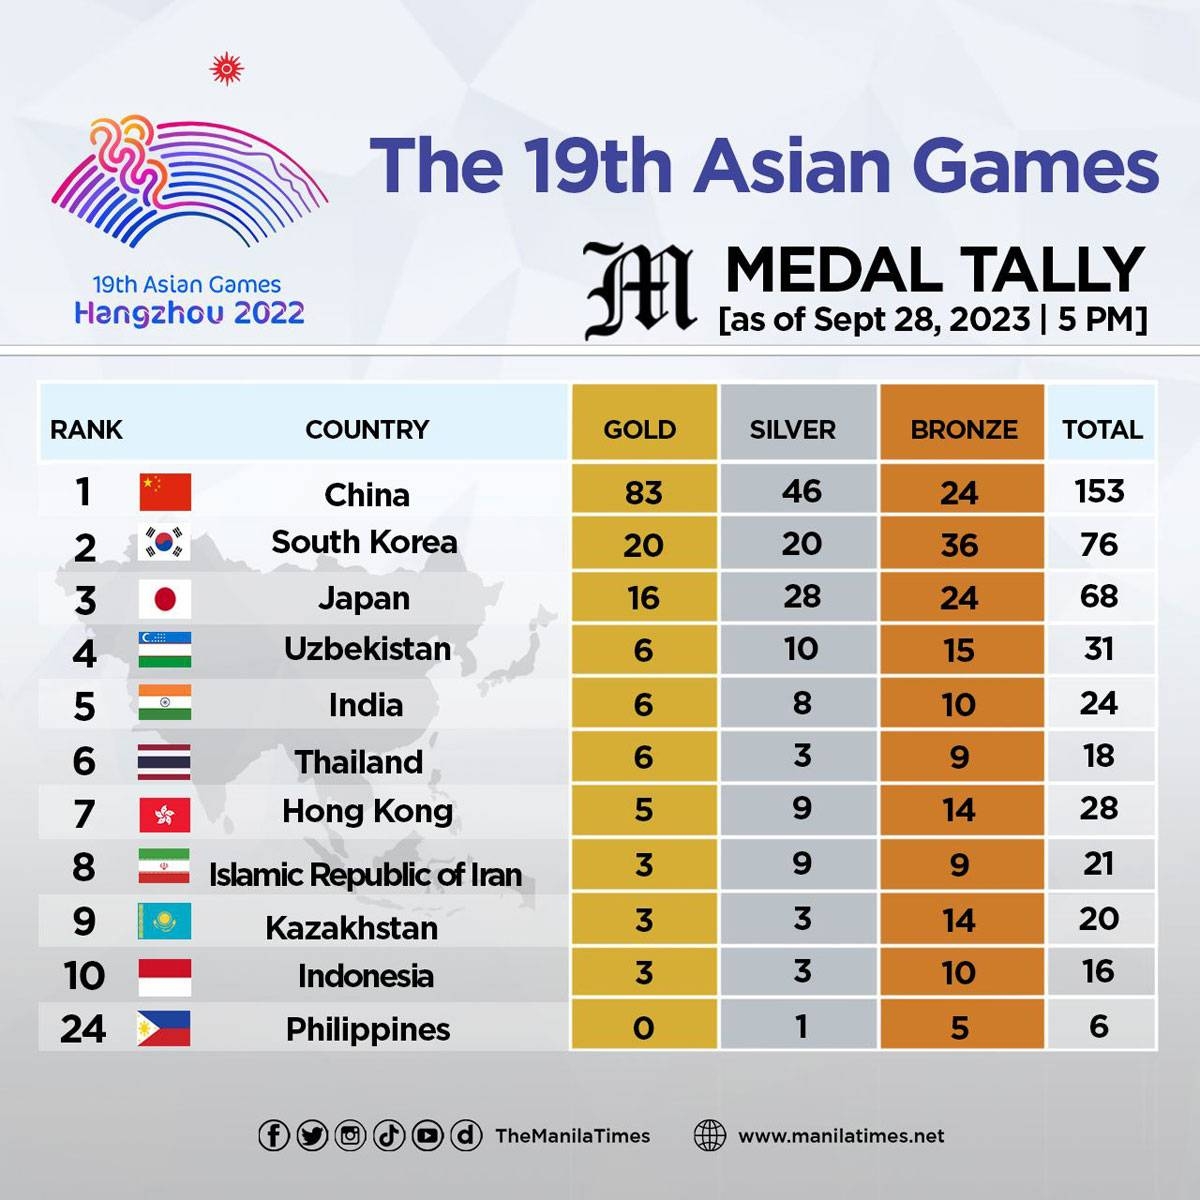 The 19th Asian Games medal tally as of Sept. 28, 2023 0500 PM The